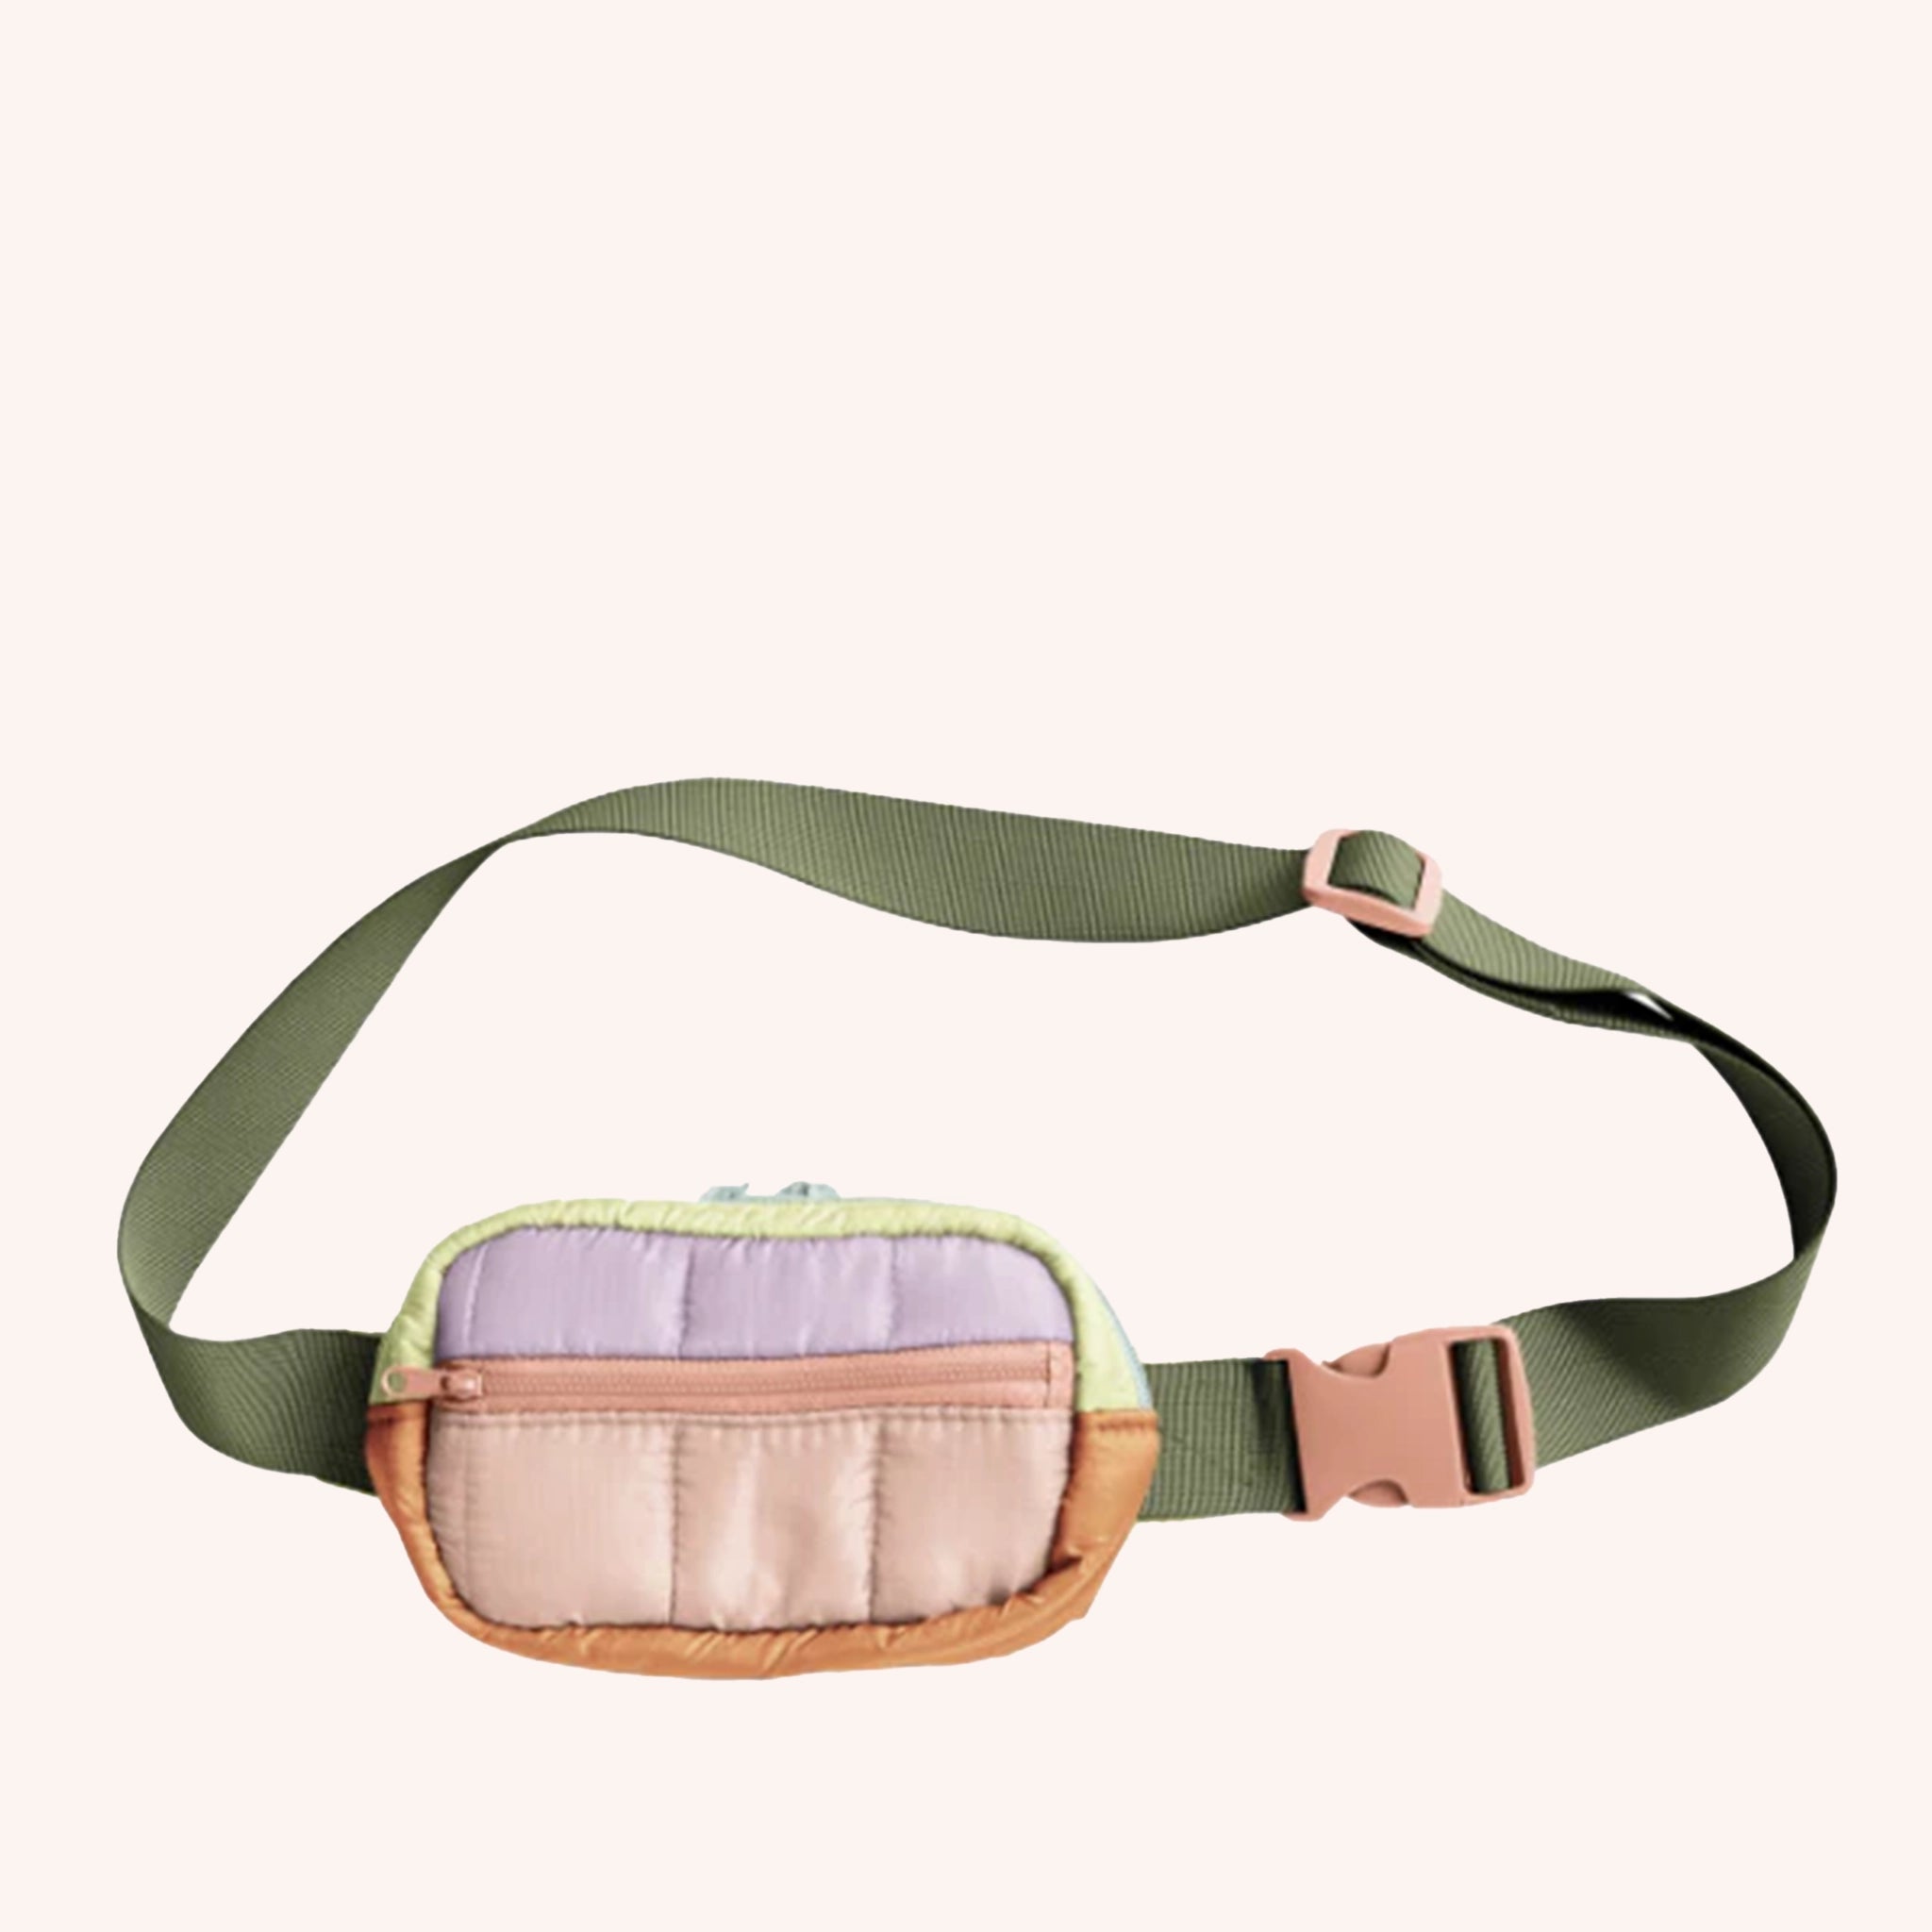 A crossbody bag or fanny pack with an adjustable olive green strap, and multiple pastel shaded color blocking. It features a puffy quilted material and also has two zipper pockets on the front.